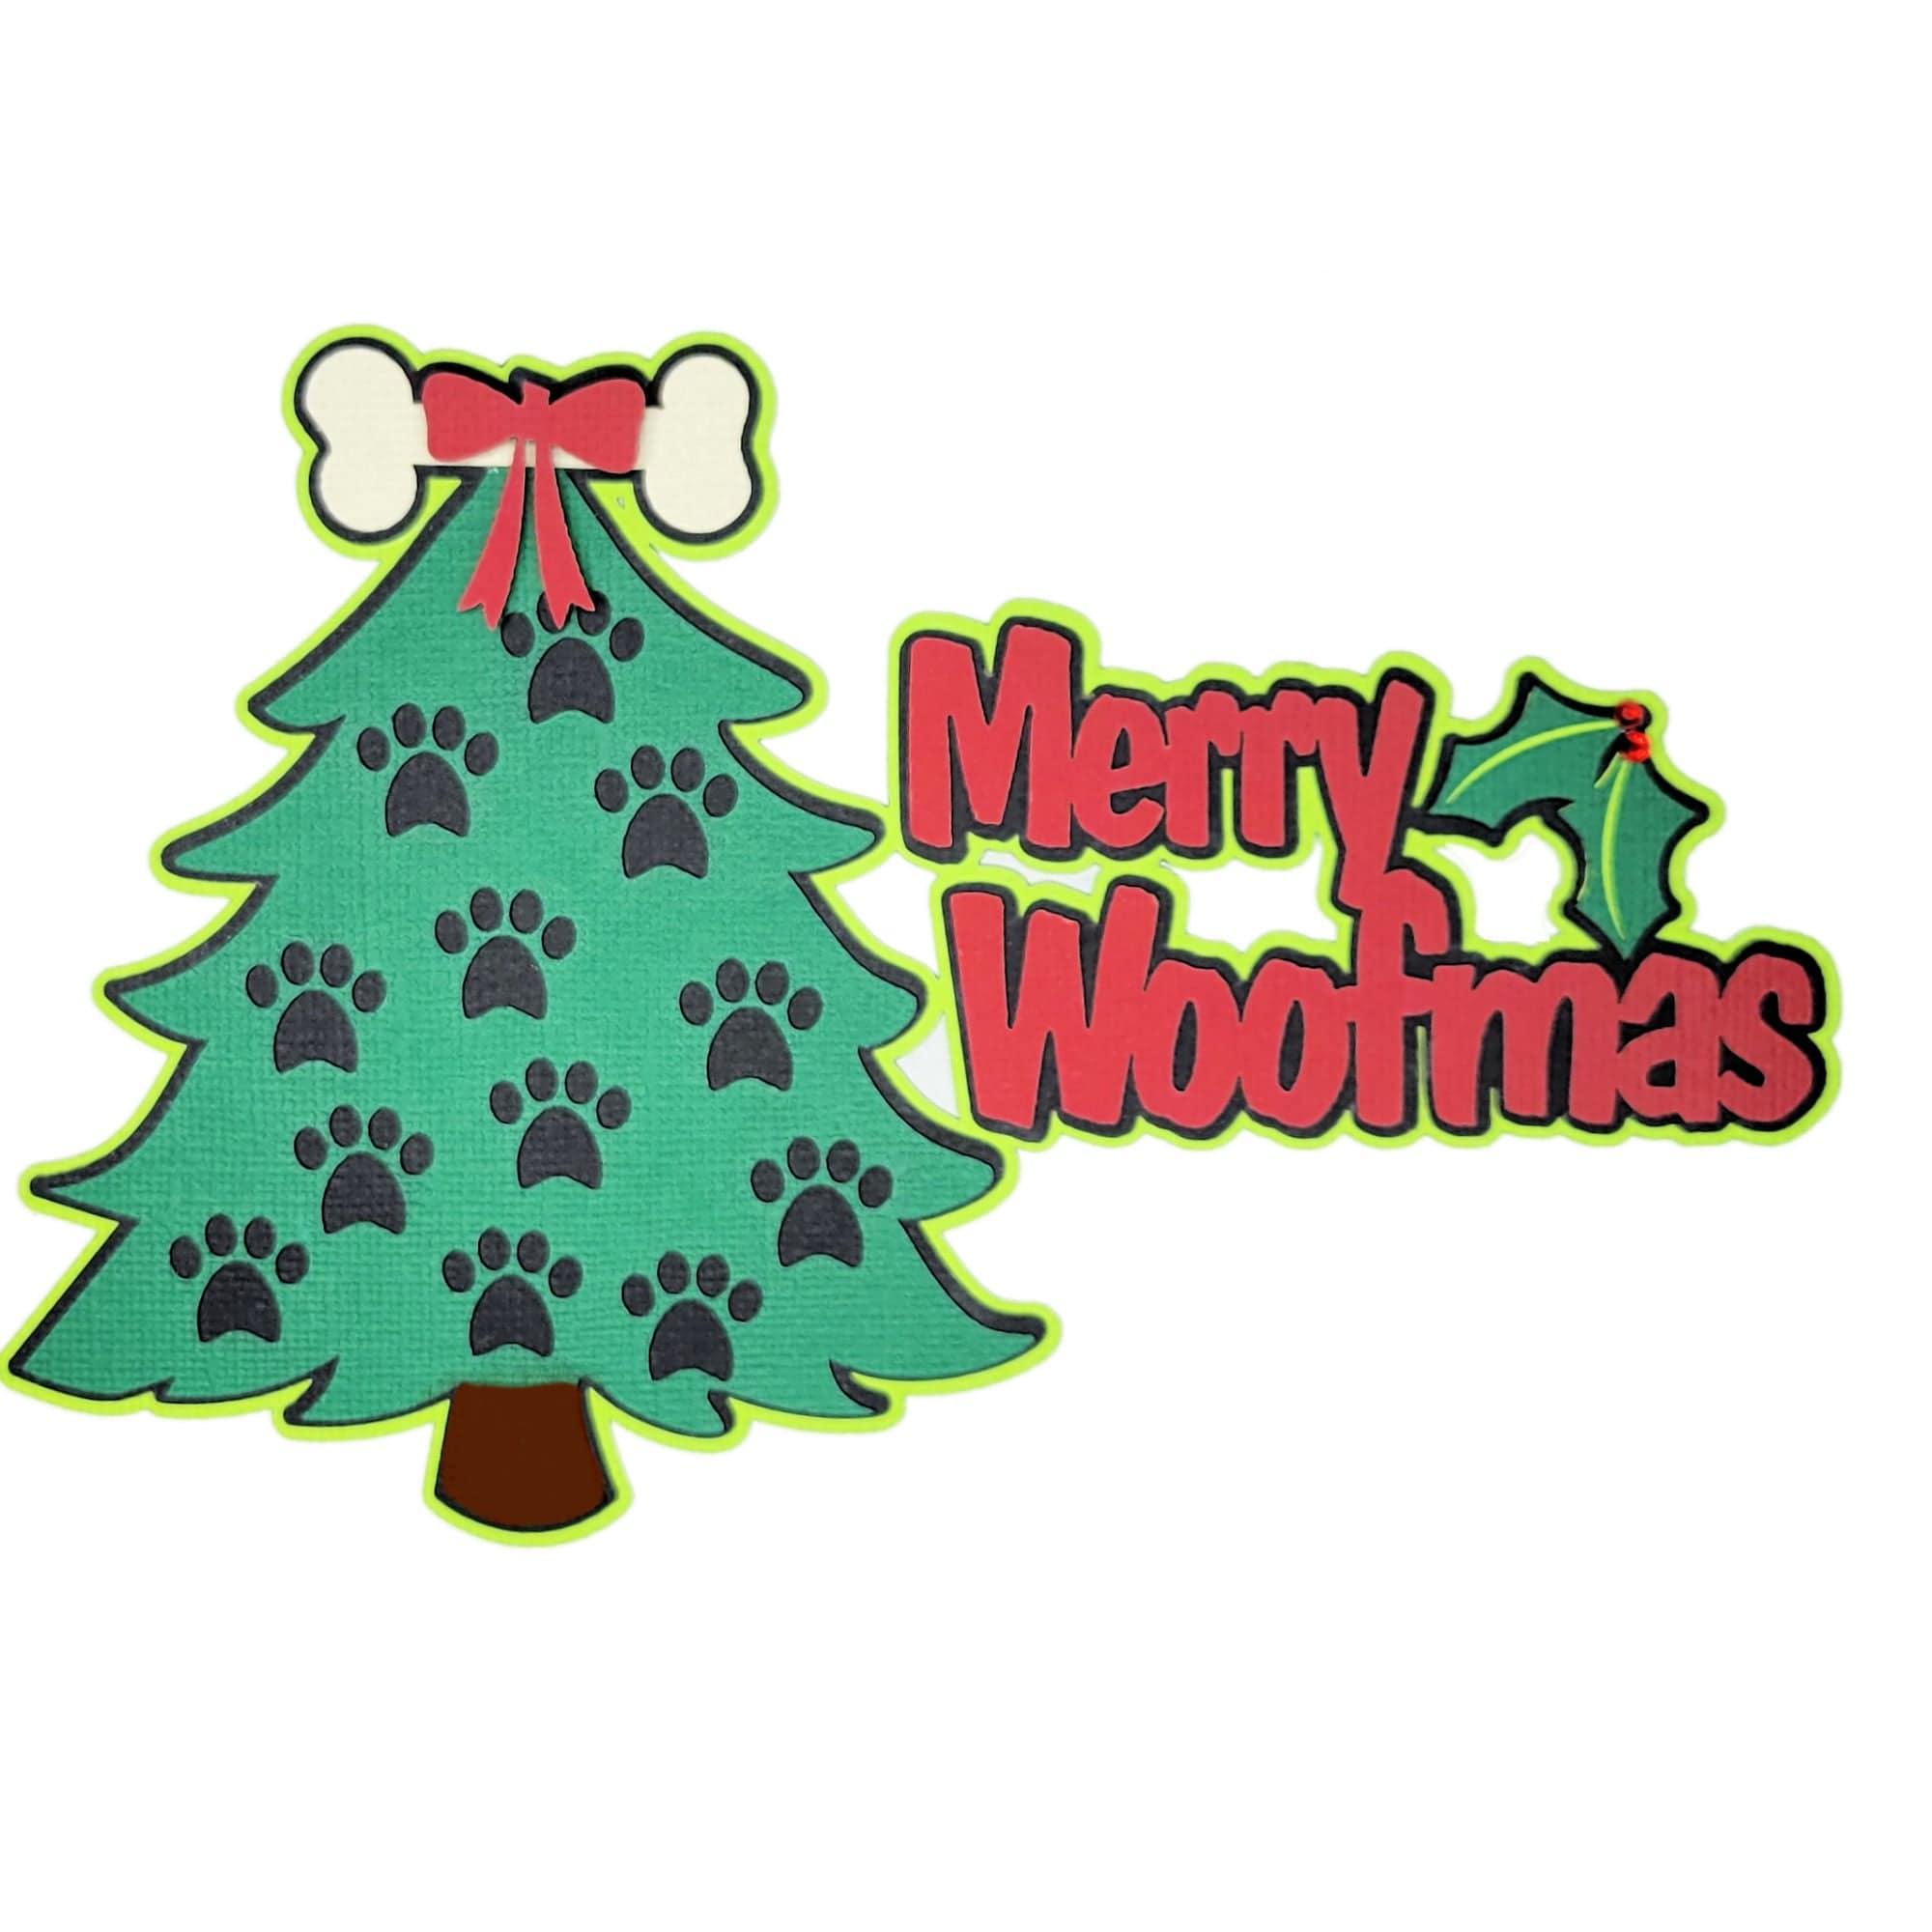 Merry Woofmas 4.5 x 7 Title Fully-Assembled Laser Cut Scrapbook Embellishment by SSC Laser Designs